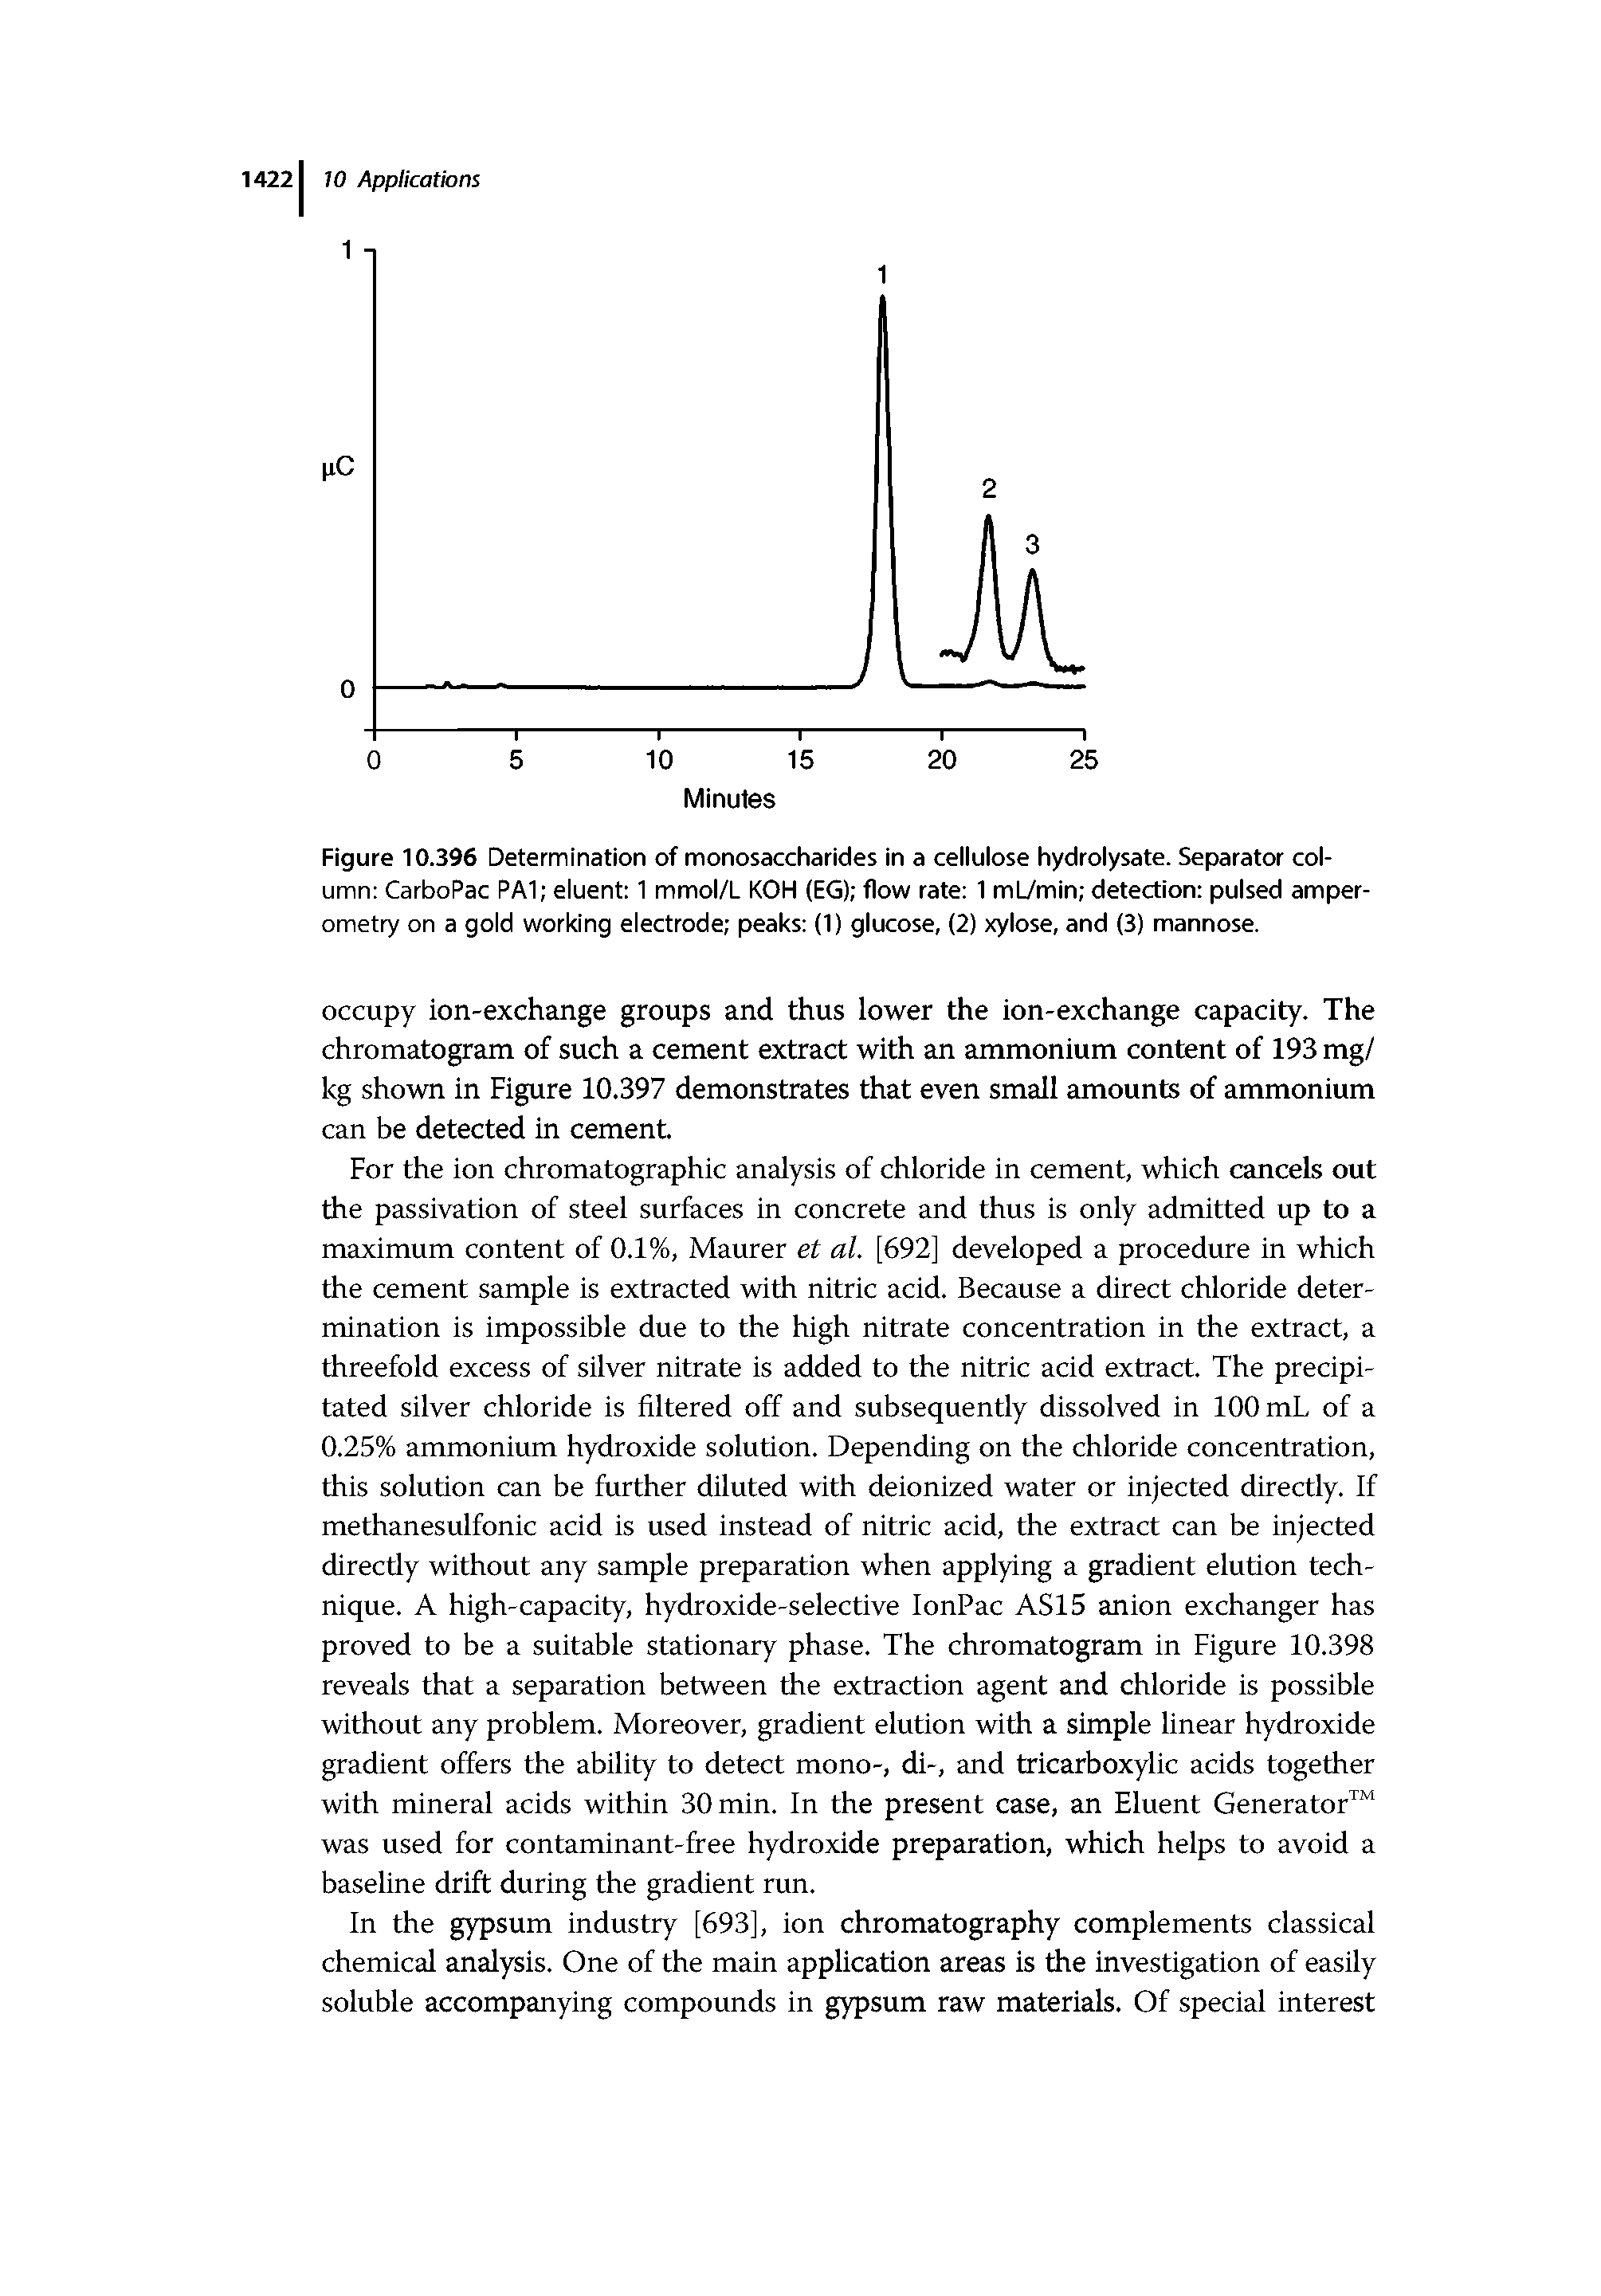 Figure 10.396 Determination of monosaccharides in a cellulose hydrolysate. Separator column CarboPac PA1 eluent 1 mmol/L KOH (EG) flow rate 1 mL/mln detection pulsed amper-ometry on a gold working electrode peaks (1) glucose, (2) xylose, and (3) mannose.